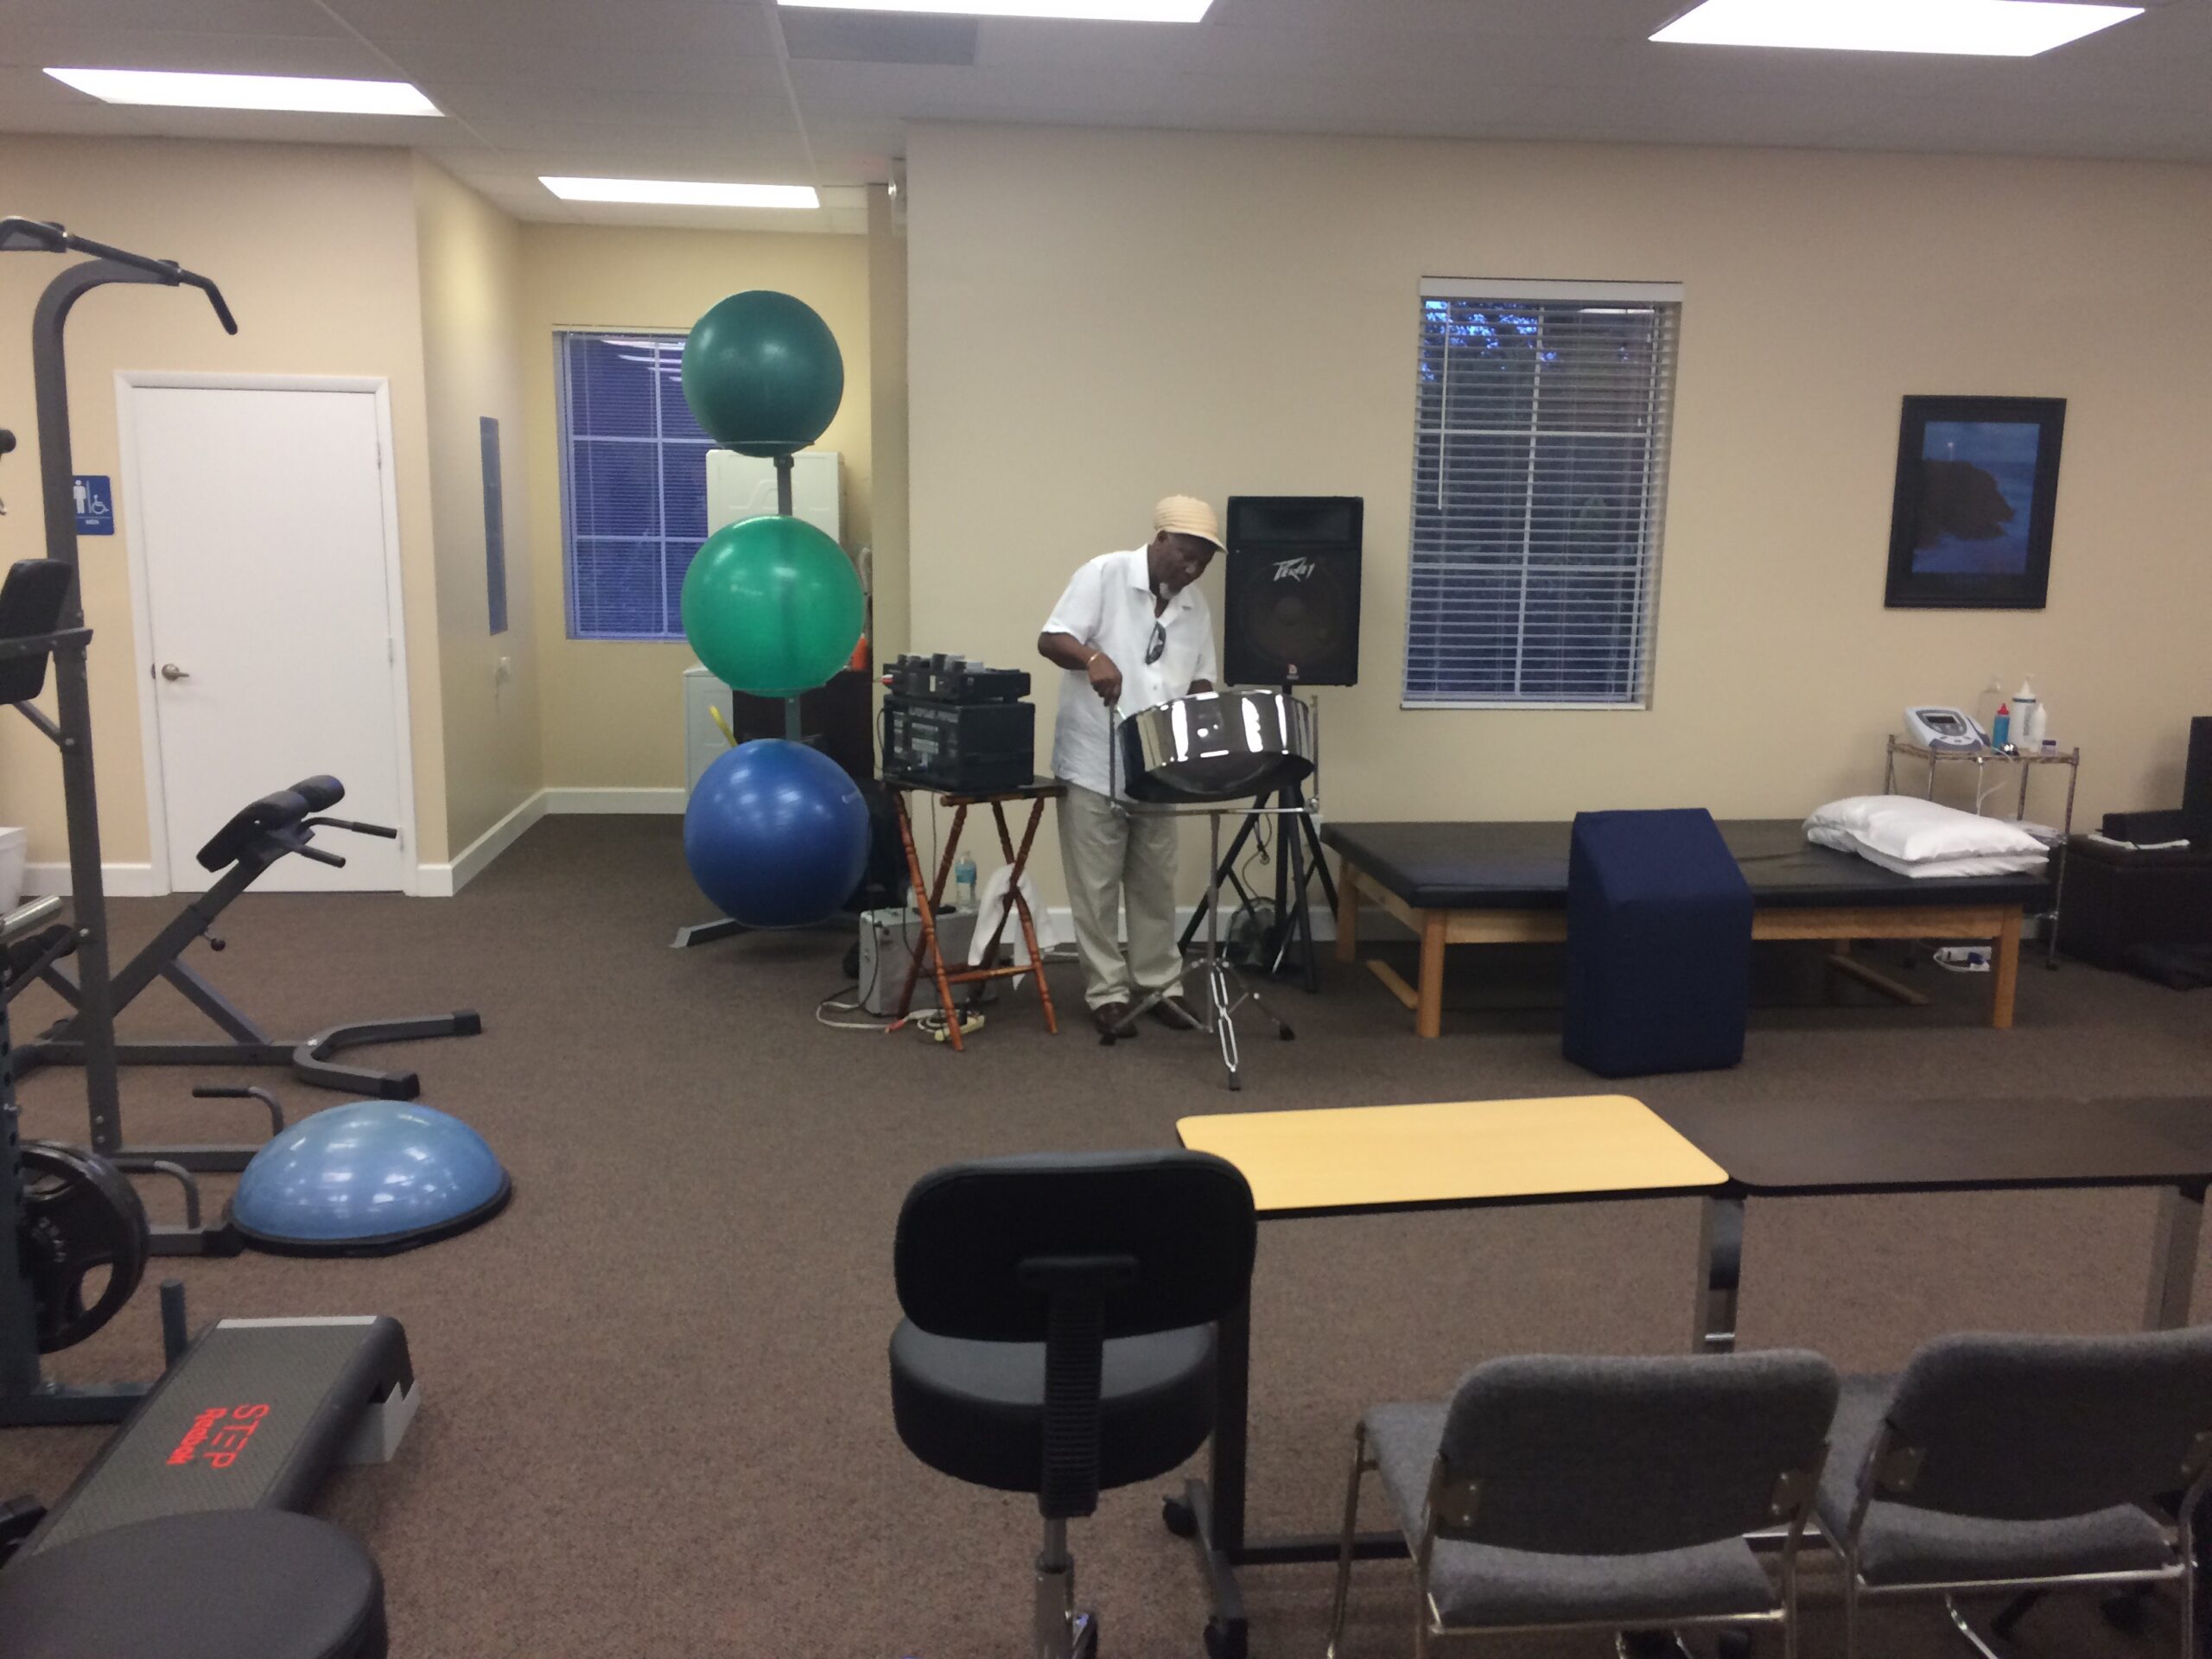 CardioFlex hosts a farewell party for its employees at its outpatient clinic in Davie, FL